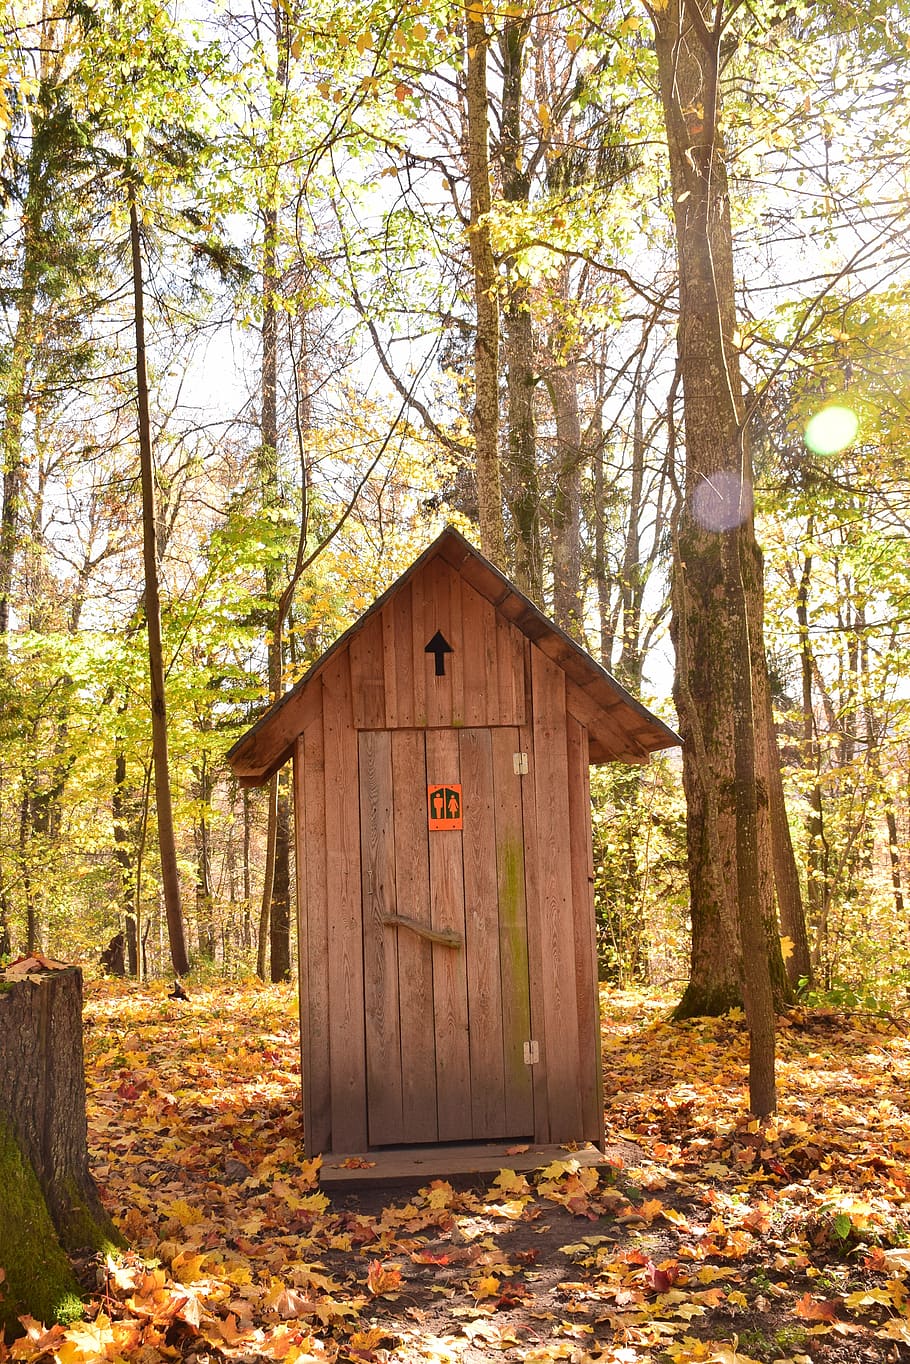 bathroom, toilet, wc, restroom, outdoor, forest, autumn, fall